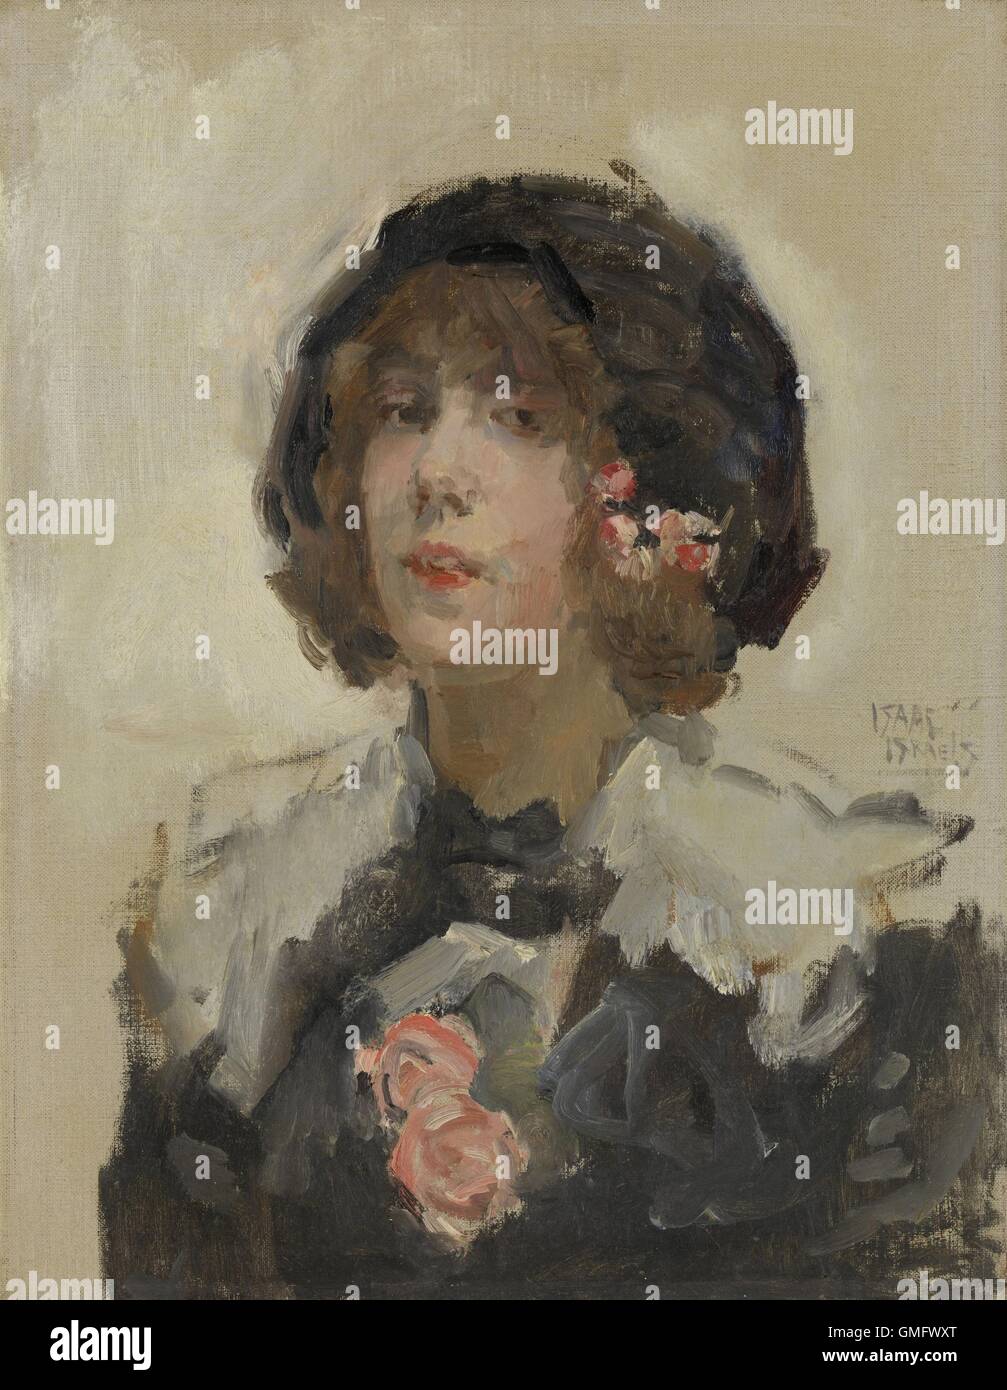 Portrait of a Woman, by Isaac Israels, c. 1900-22, painting, oil on canvas. Impressionist portrait of a woman with pink flowers Stock Photo